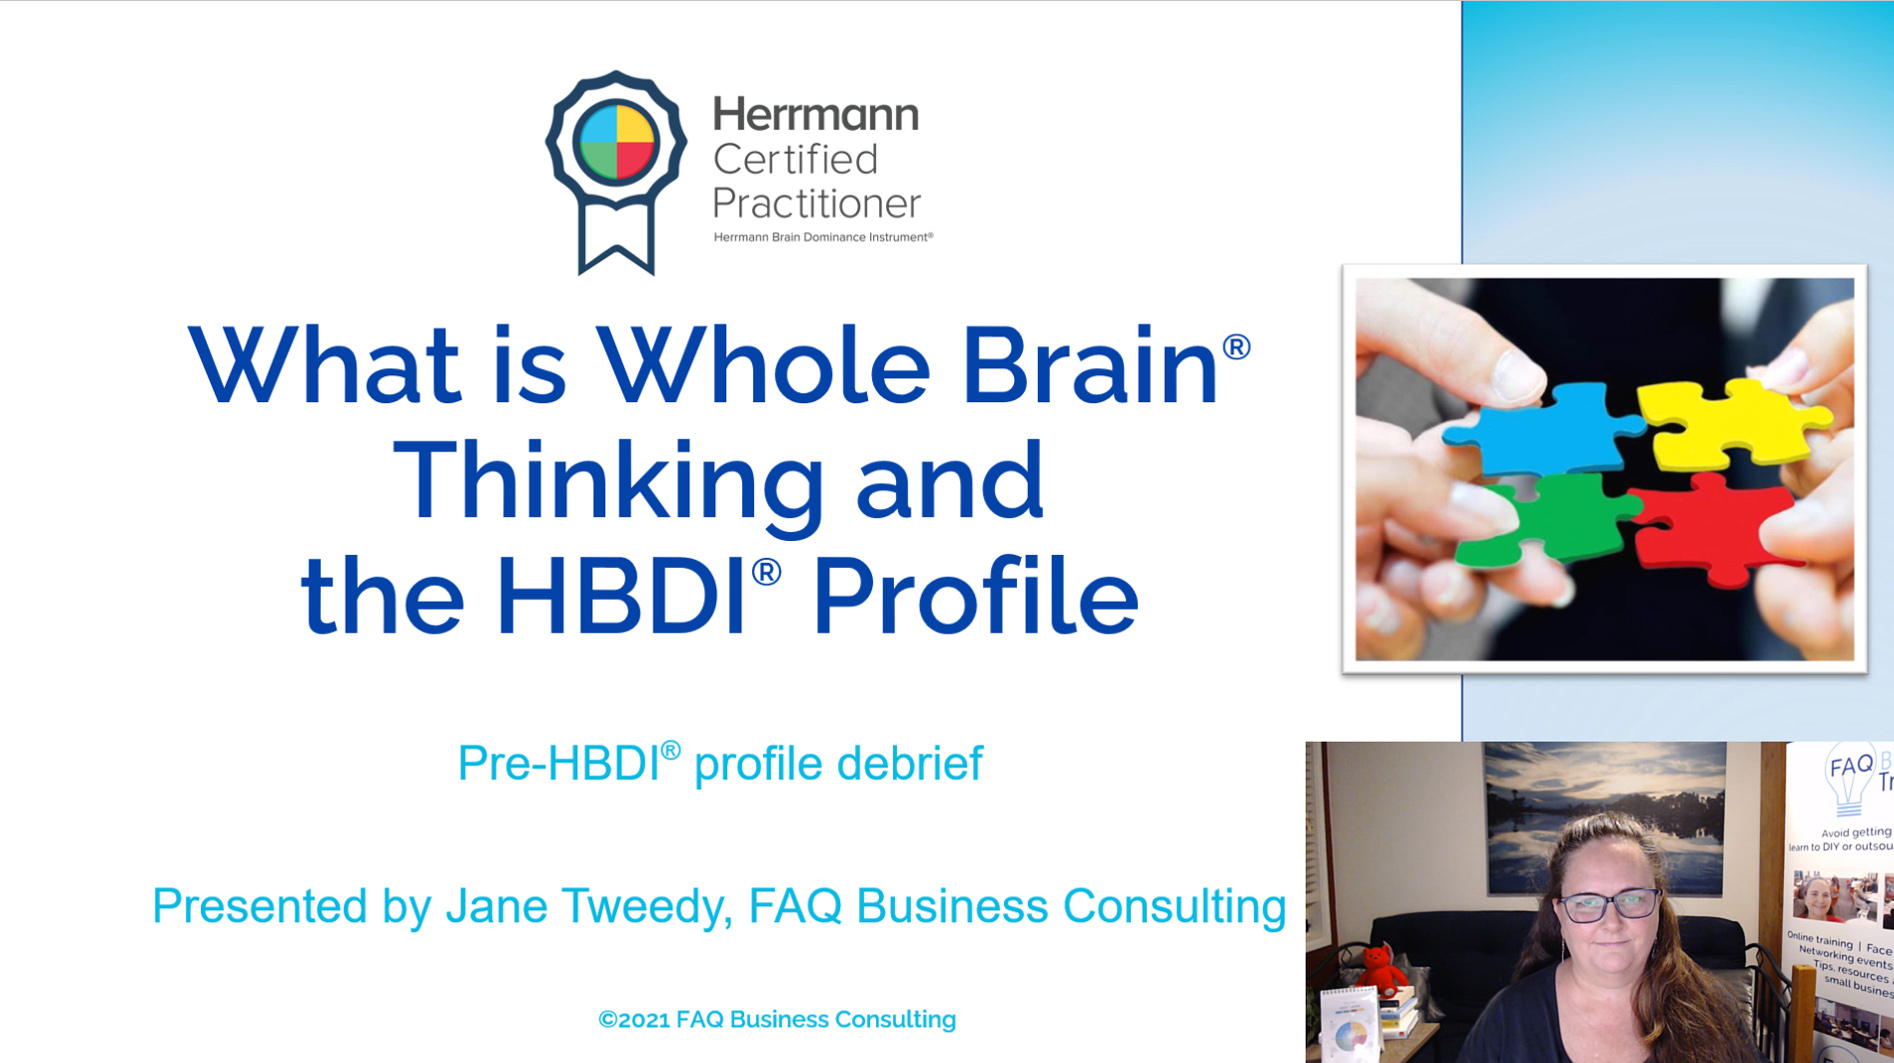 What is Whole Brain® Thinking and HBDI®